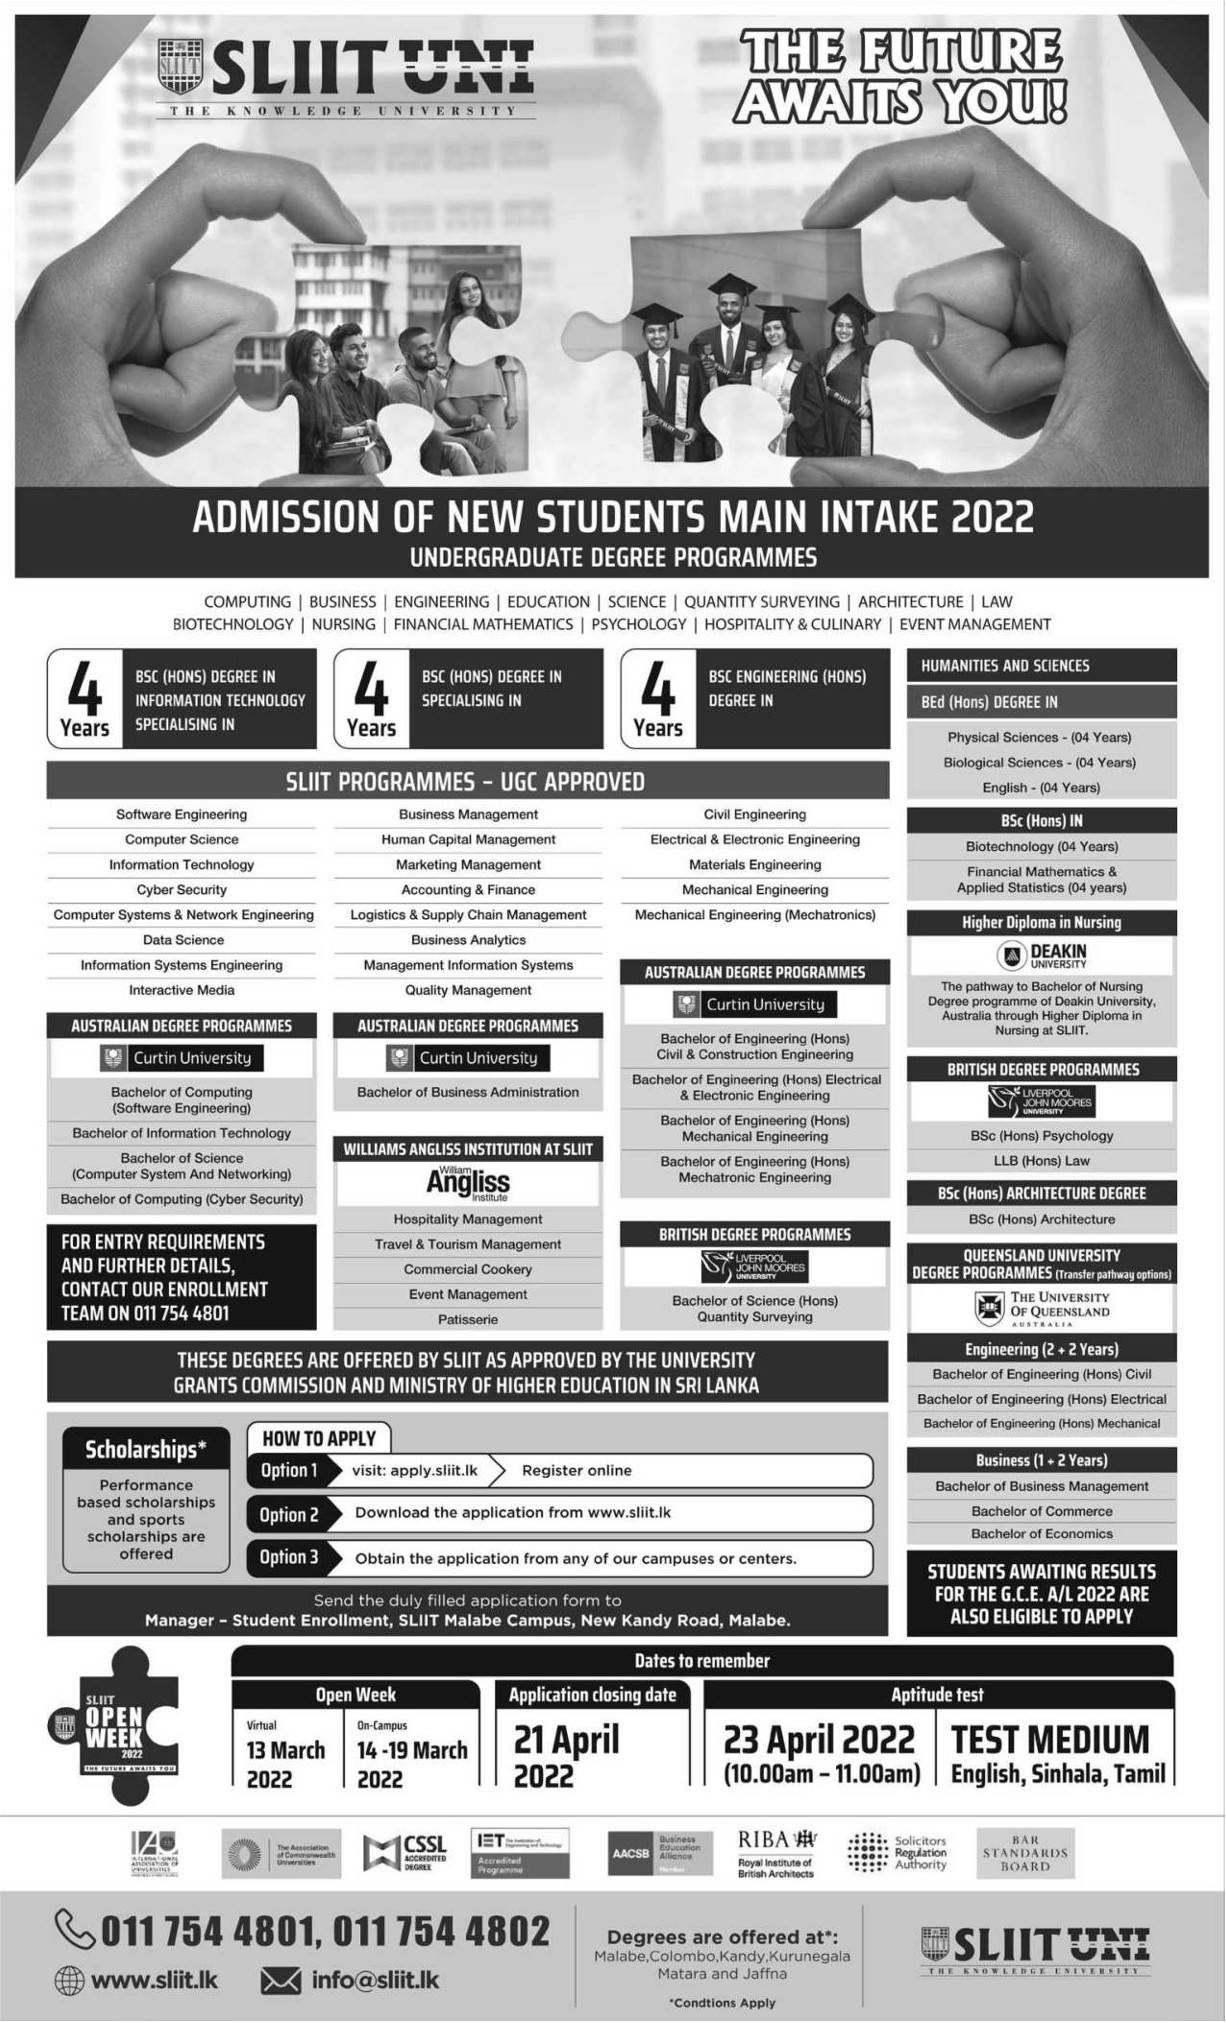 SLIIT Degree Main Intake 2022 Admission of New Students